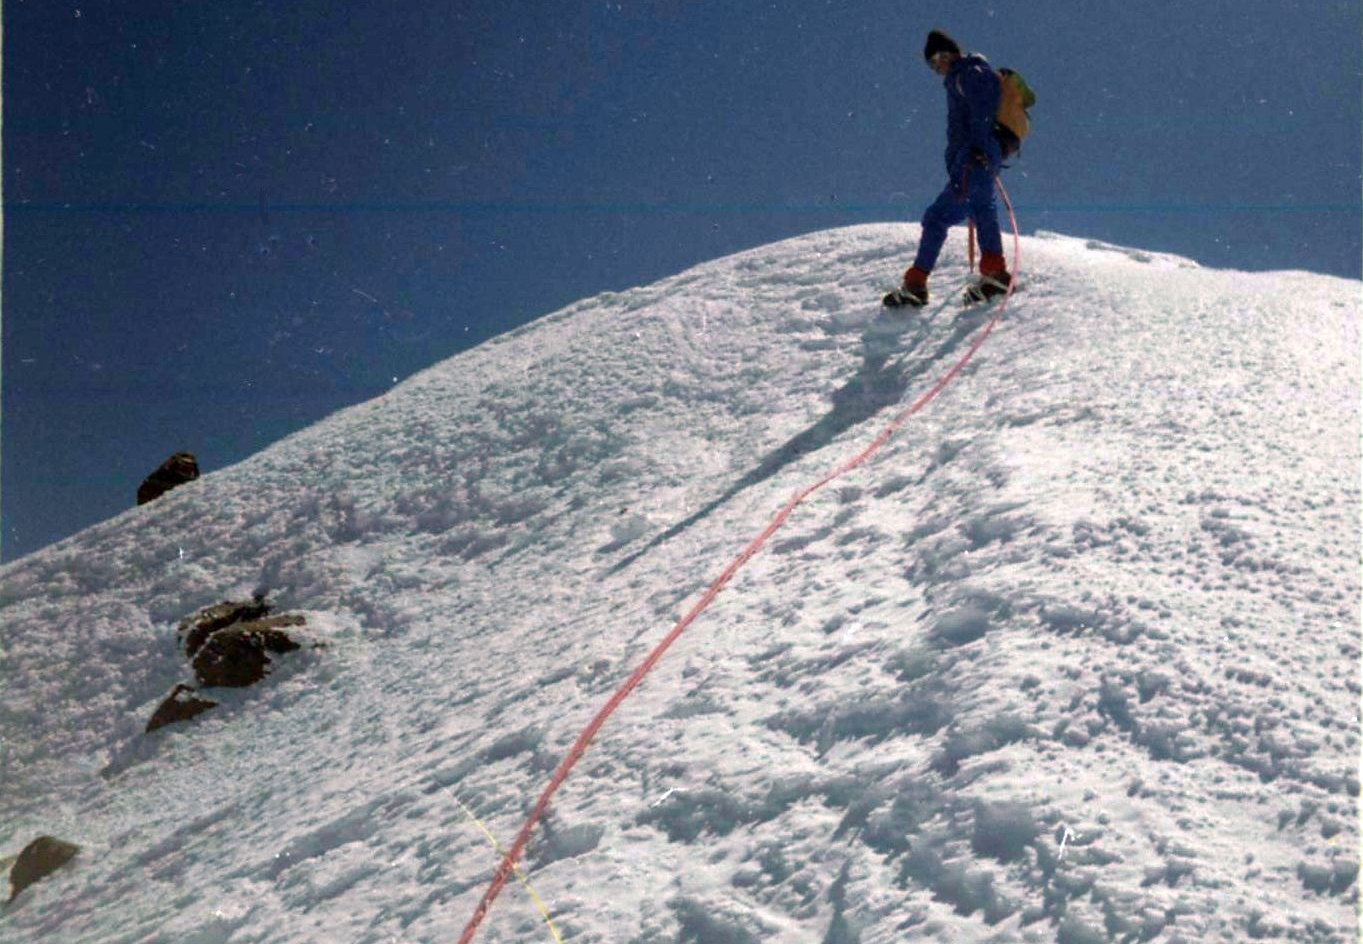 Climber approaching summit of Monte Rosa